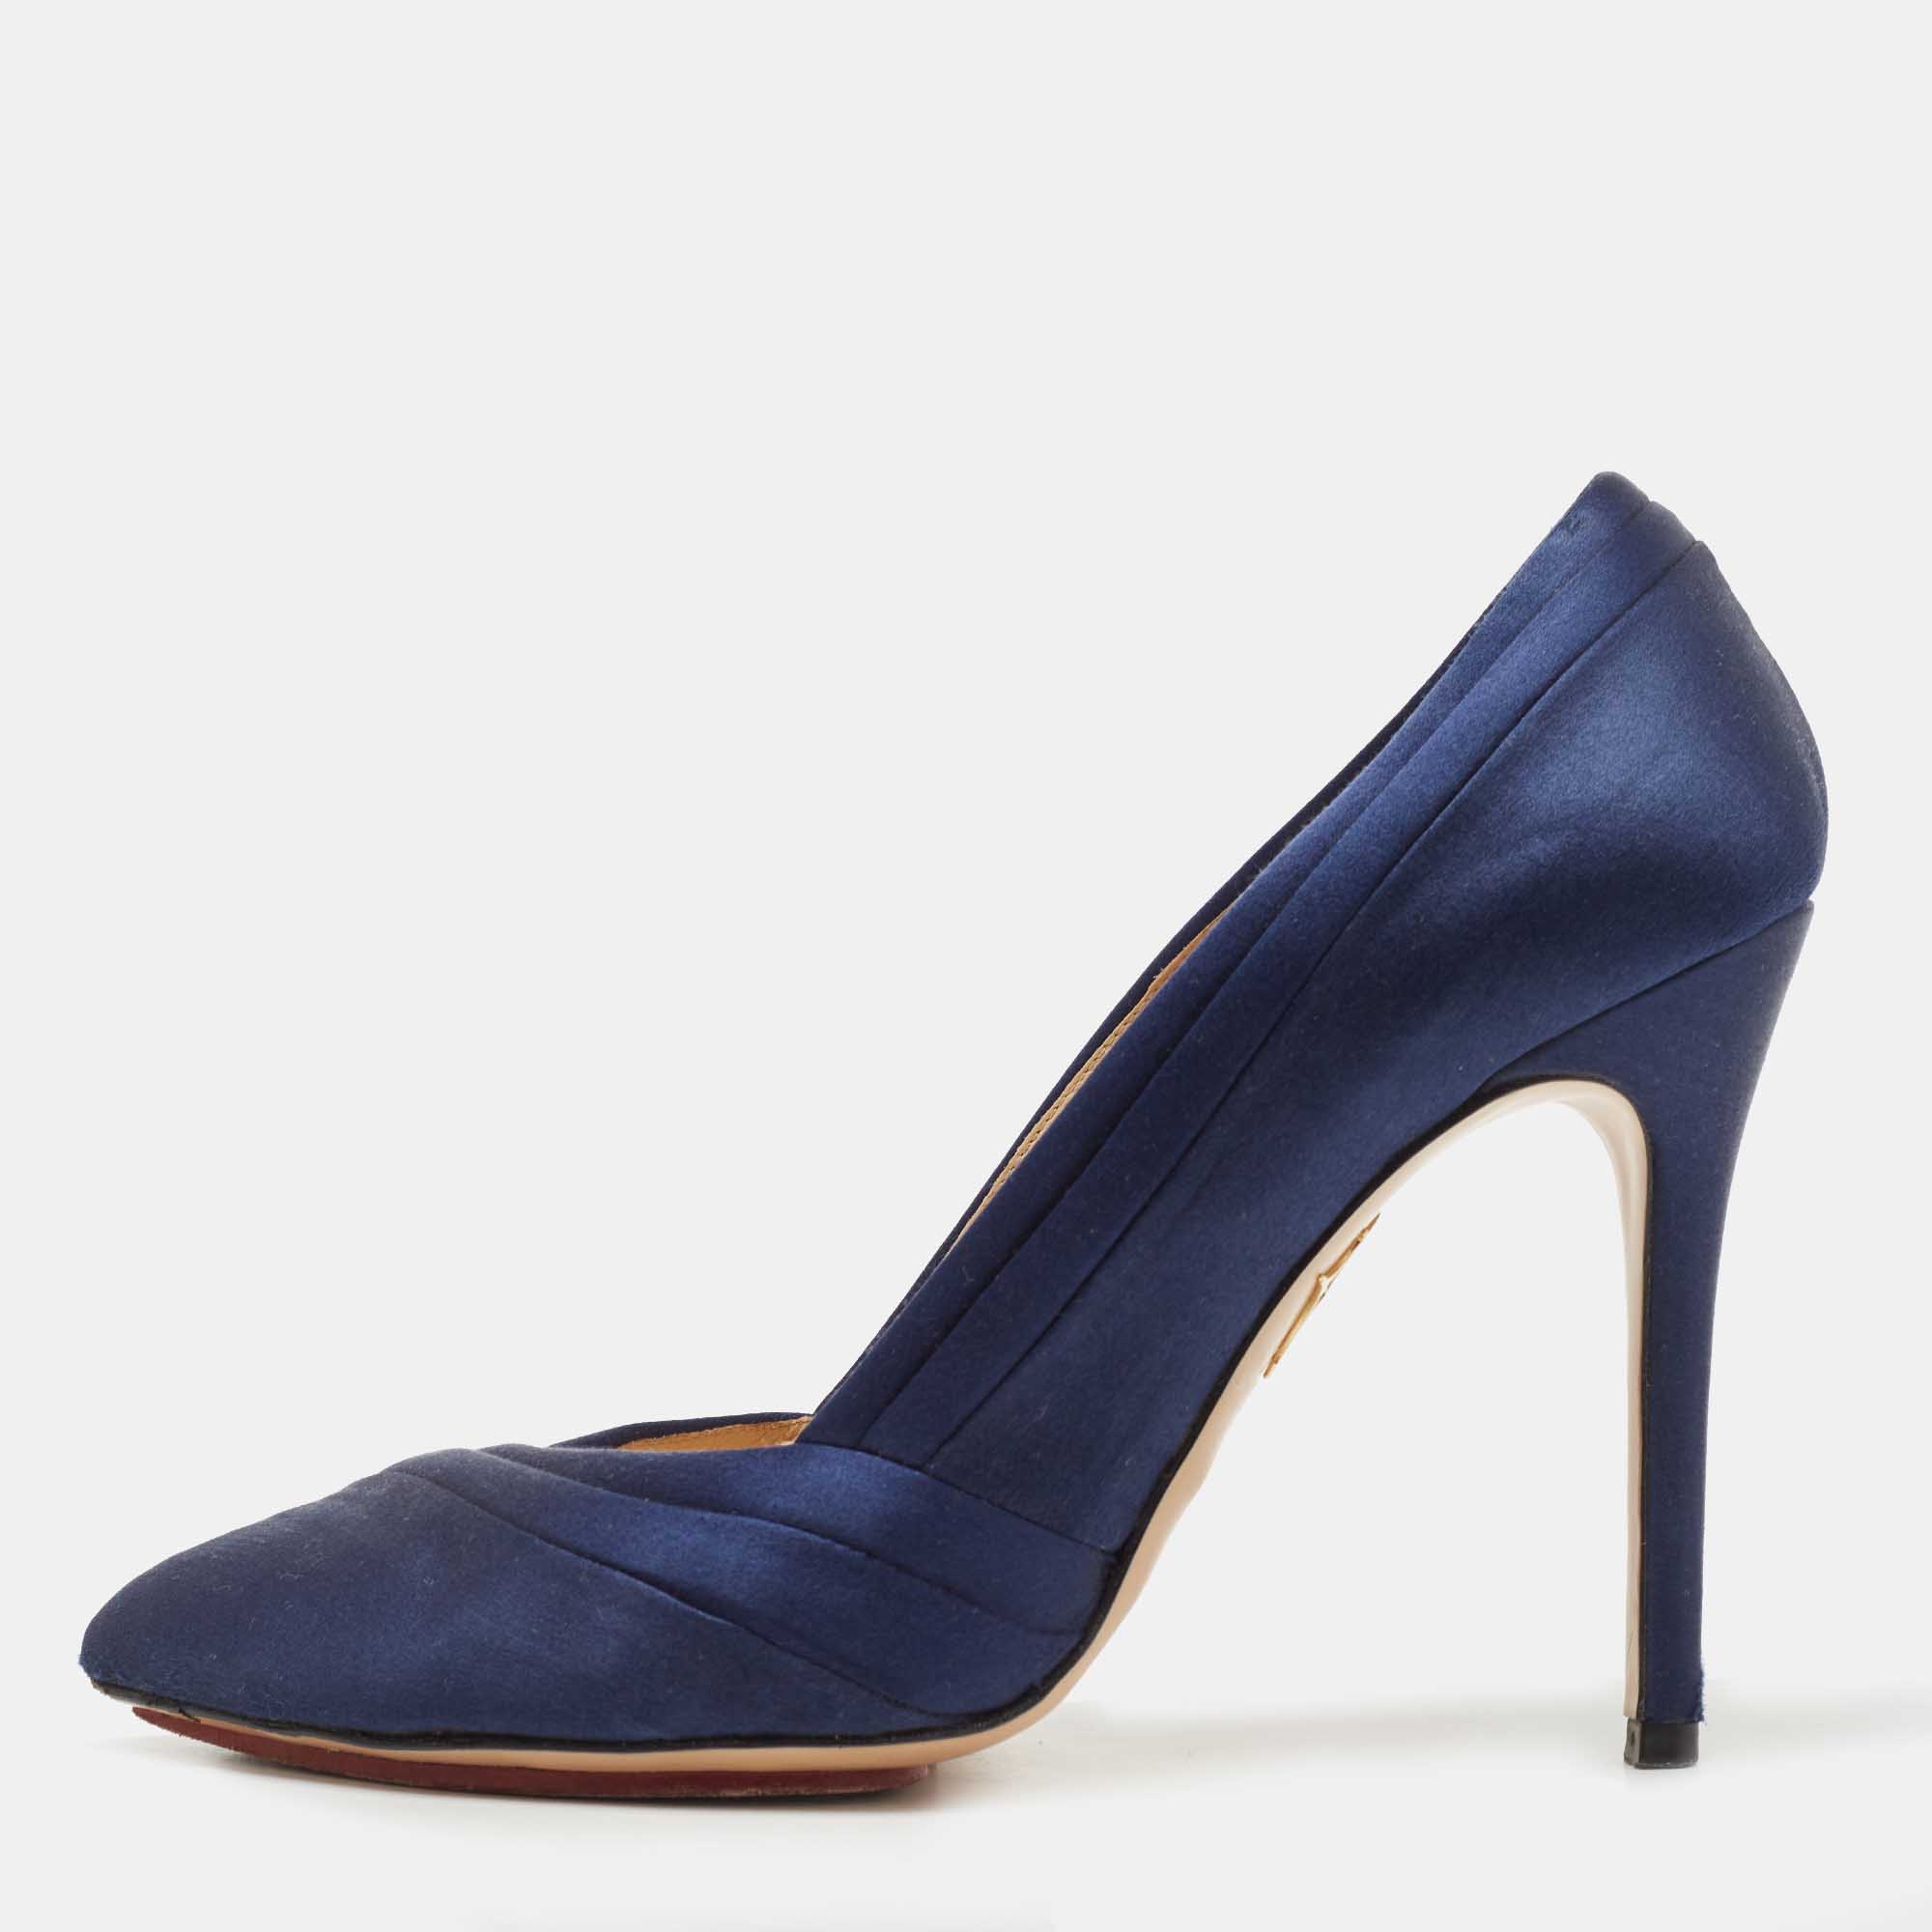 Beautiful and fabulous this pair of Charlotte Olympia pumps will take you to new levels. Made from satin their smooth exterior has just the right amount of shine colored with a navy blue shade. The platforms and 12cm heels finish them off perfectly.